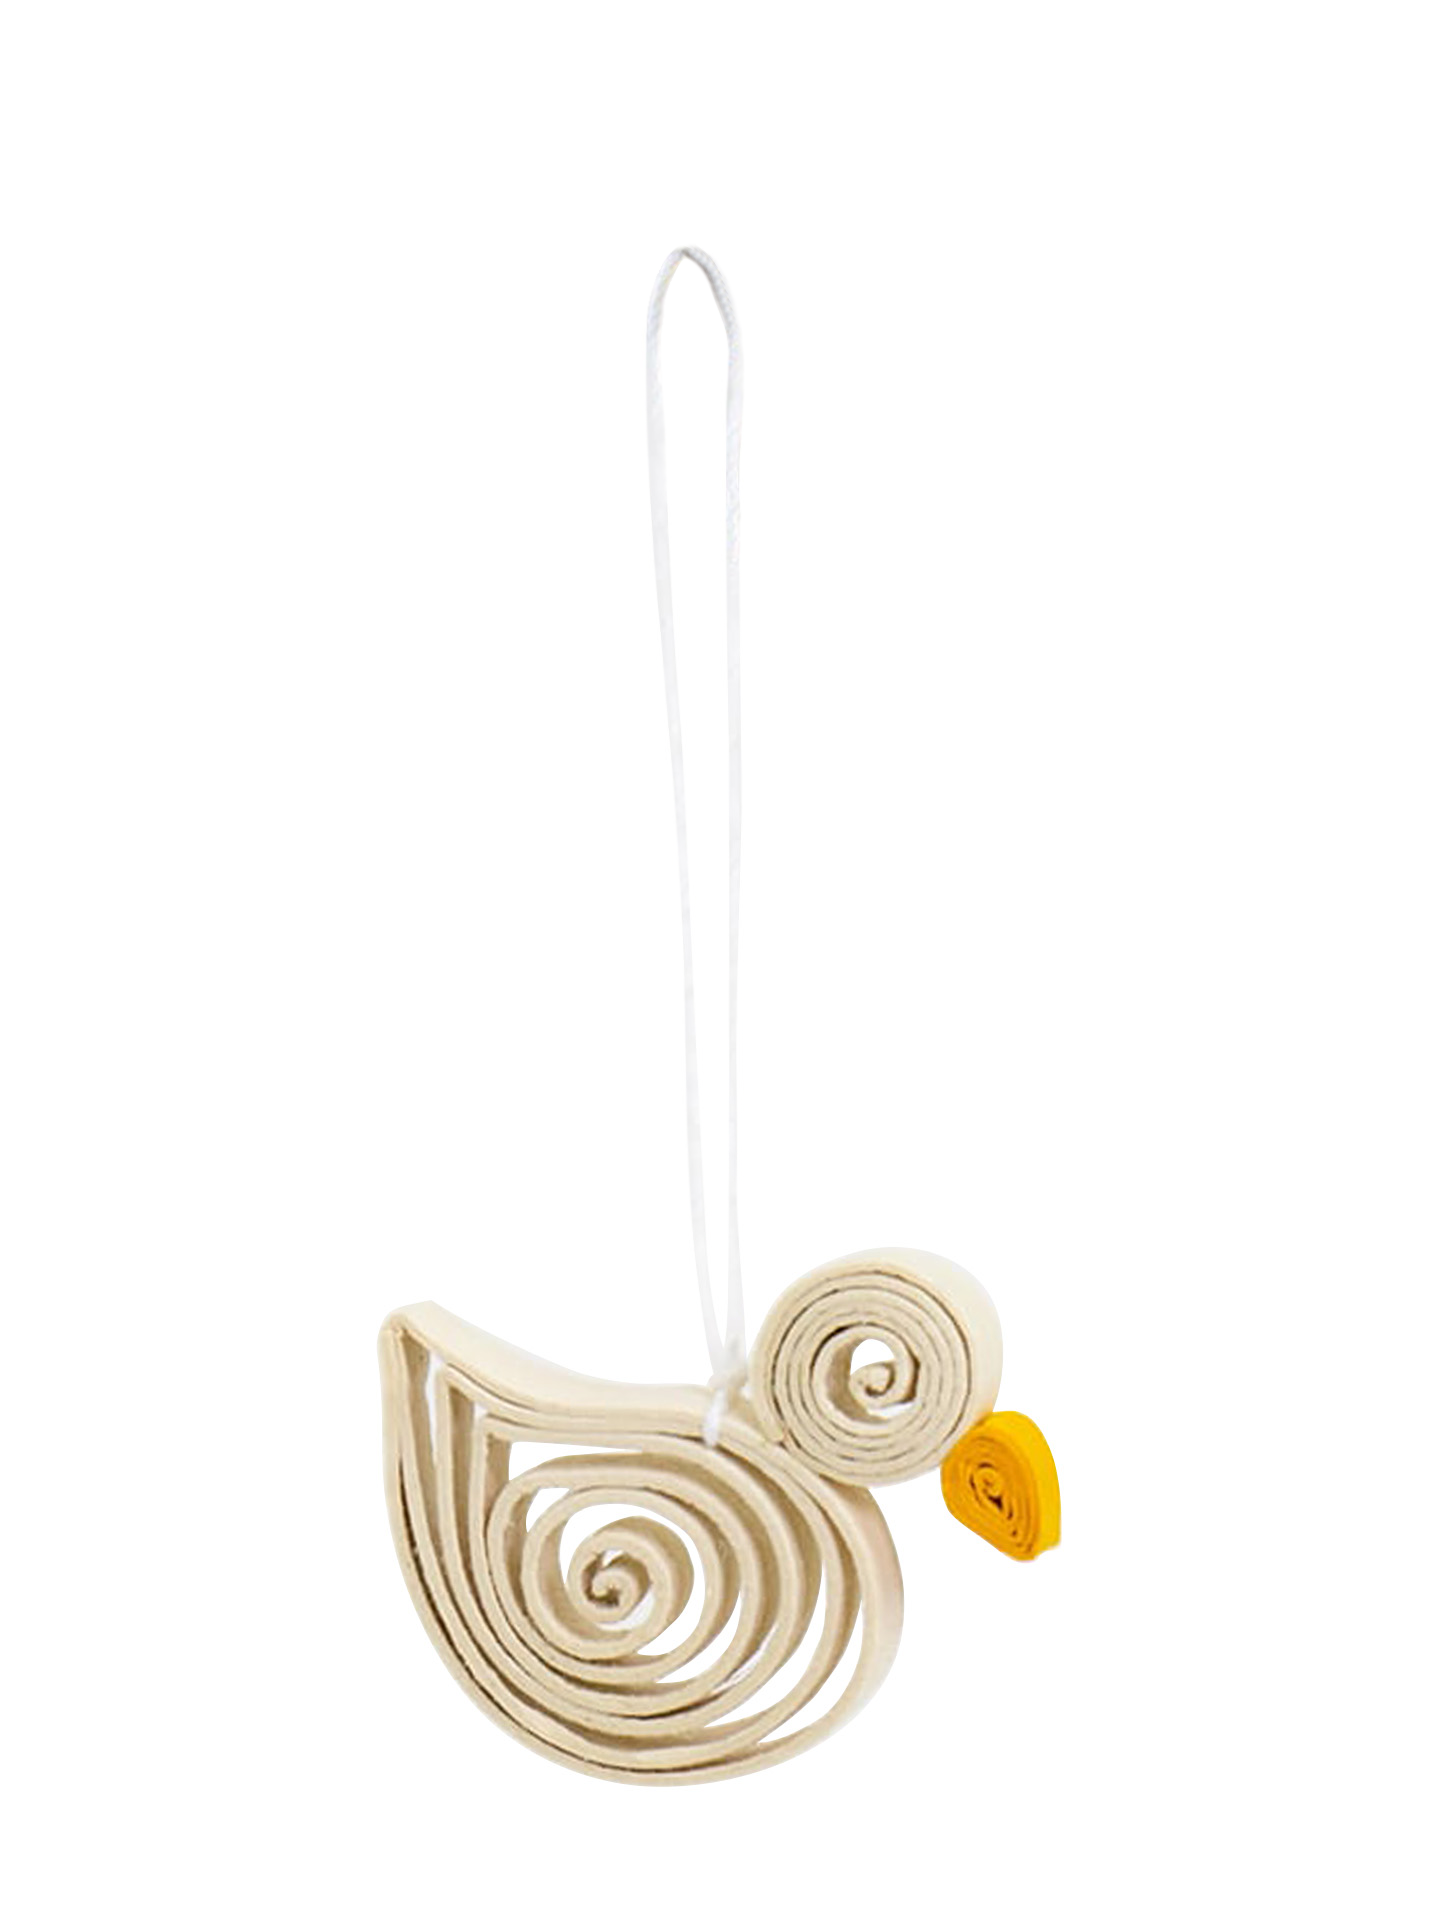 Quilled Chicken Easter ornament, set of 10